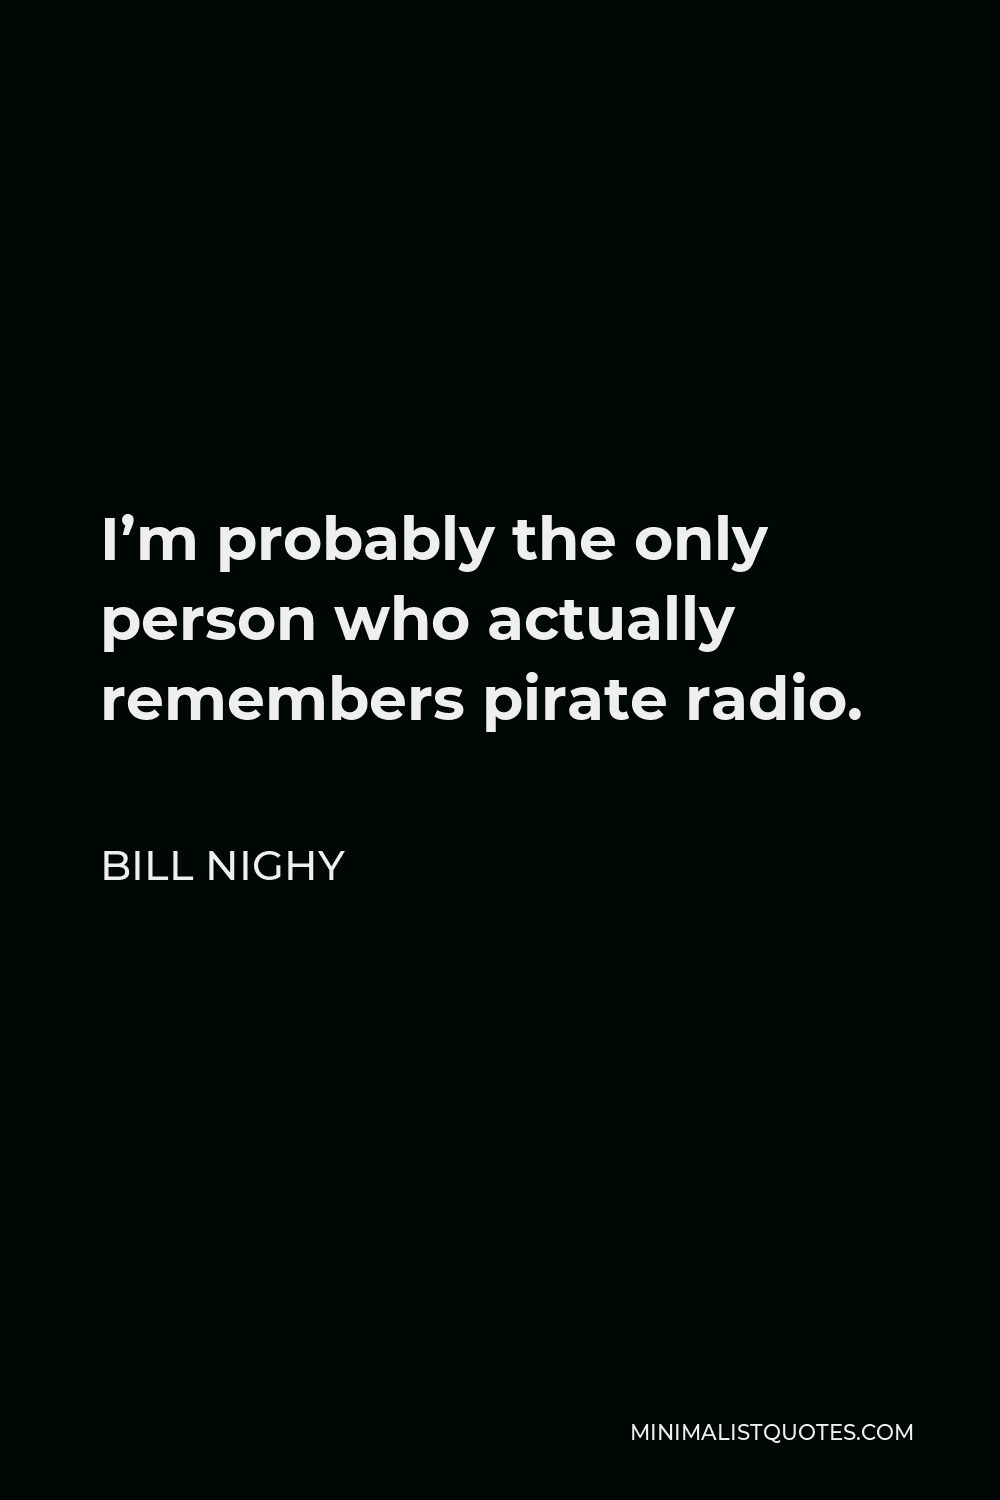 Bill Nighy Quote - I’m probably the only person who actually remembers pirate radio.